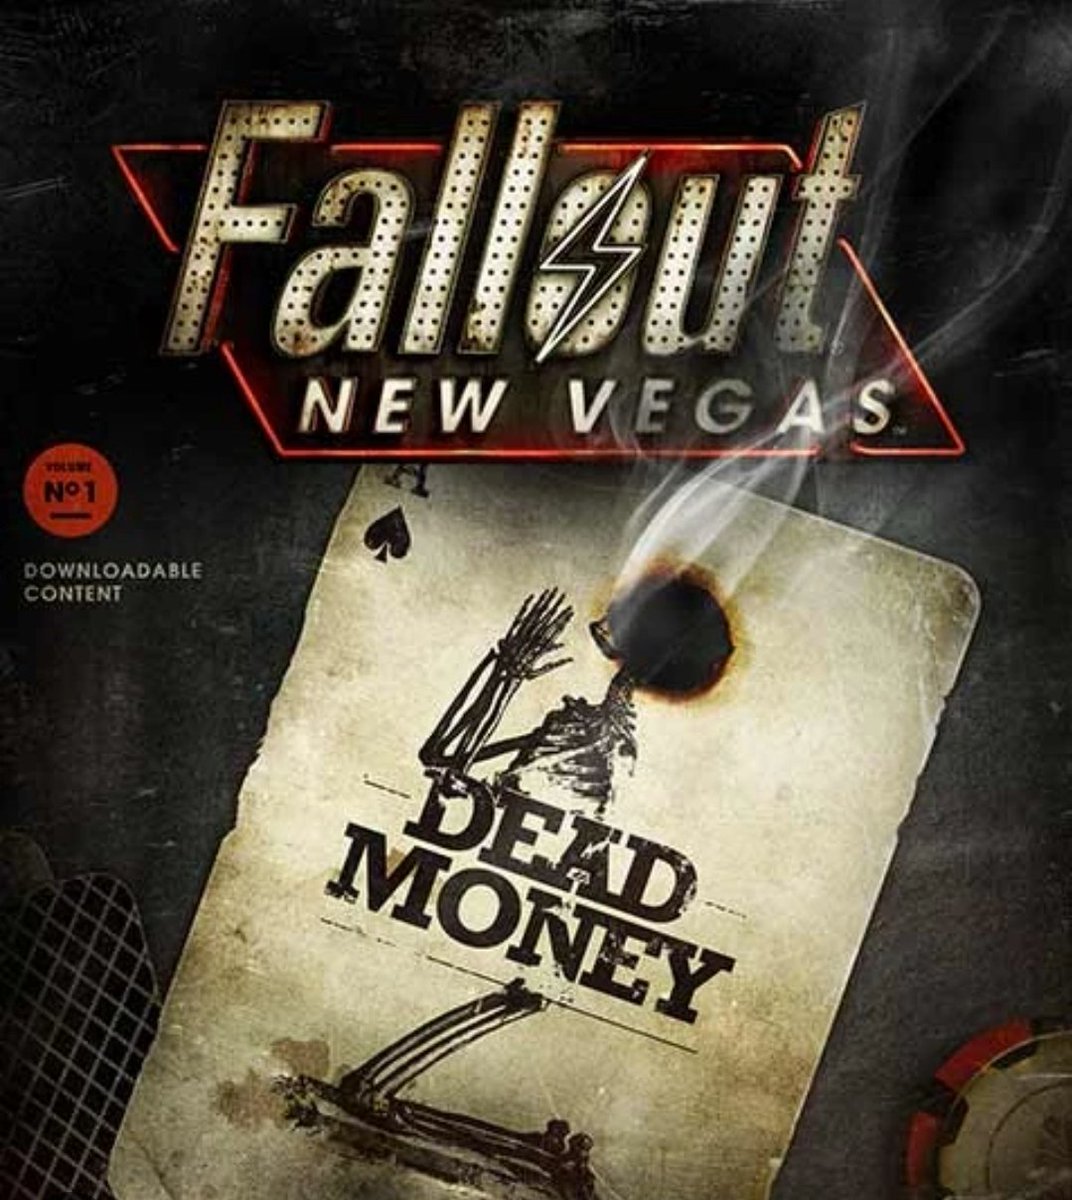 Good morning my beautiful people 💜 let's finish Fallout New Vegas Dead Money 💰. Twitch.tv/Sarah_paradise2 
#FalloutNewVegas
#DeadMoney
#SierraMadre
#Ghost 
#Casino
#Twitch
#TwitchStreamers 
#GamerGirl